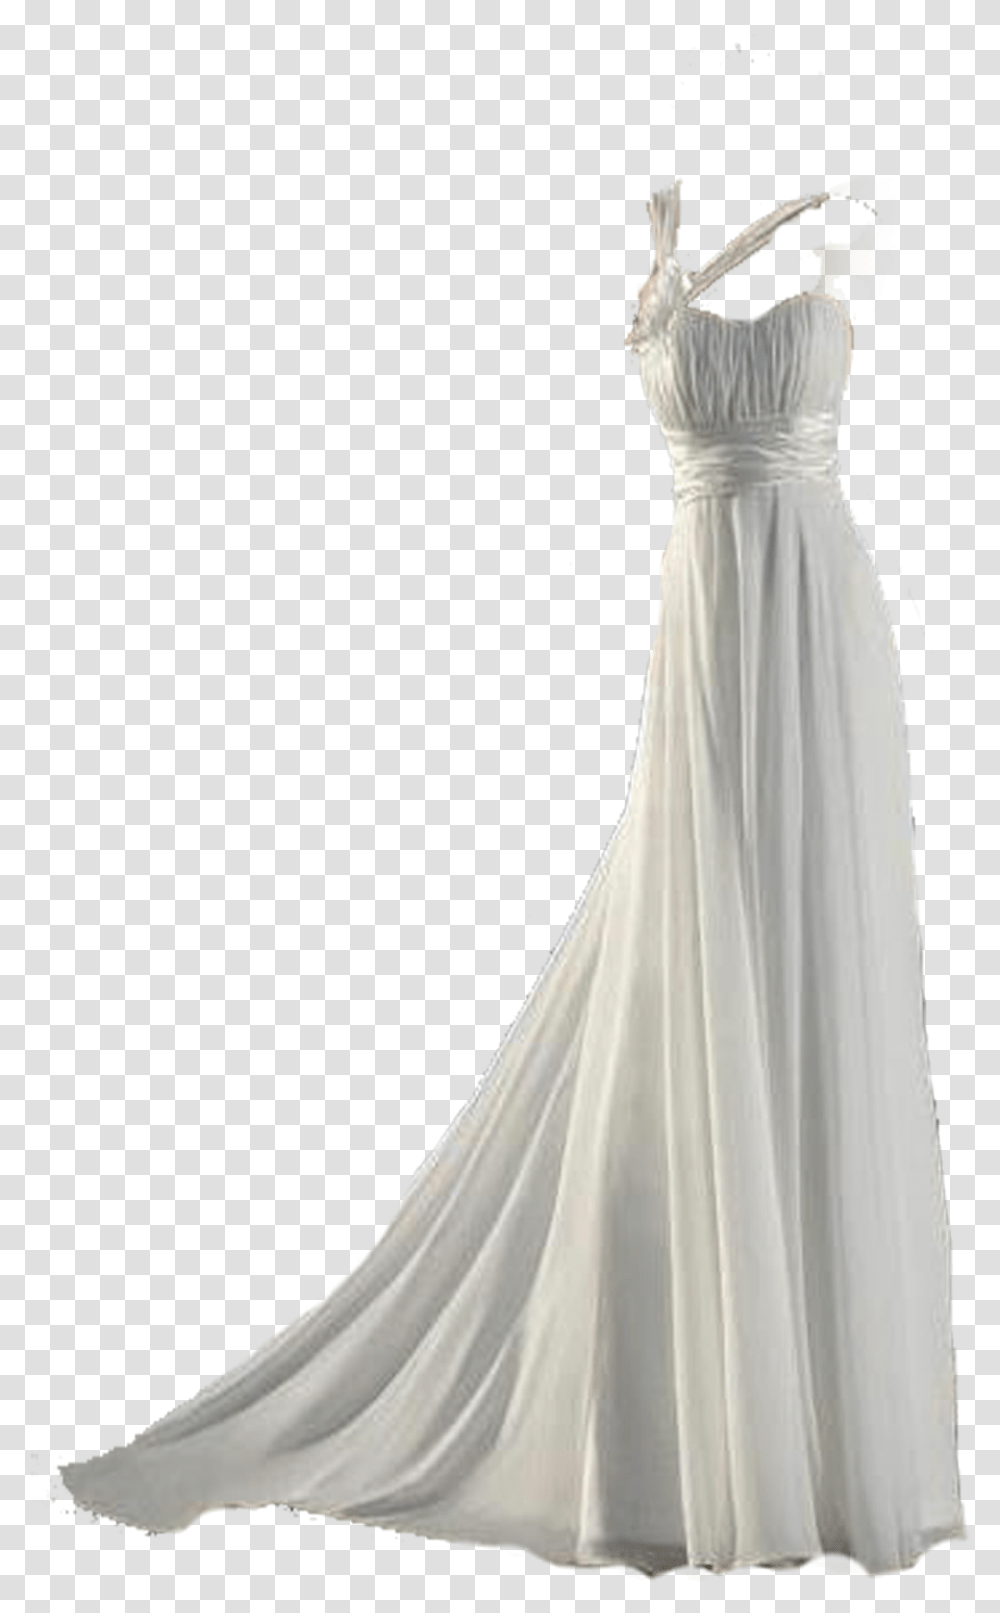 Wedding Dress Gown Clothing Formal Wear Formal Dress Background, Apparel, Wedding Gown, Robe, Fashion Transparent Png